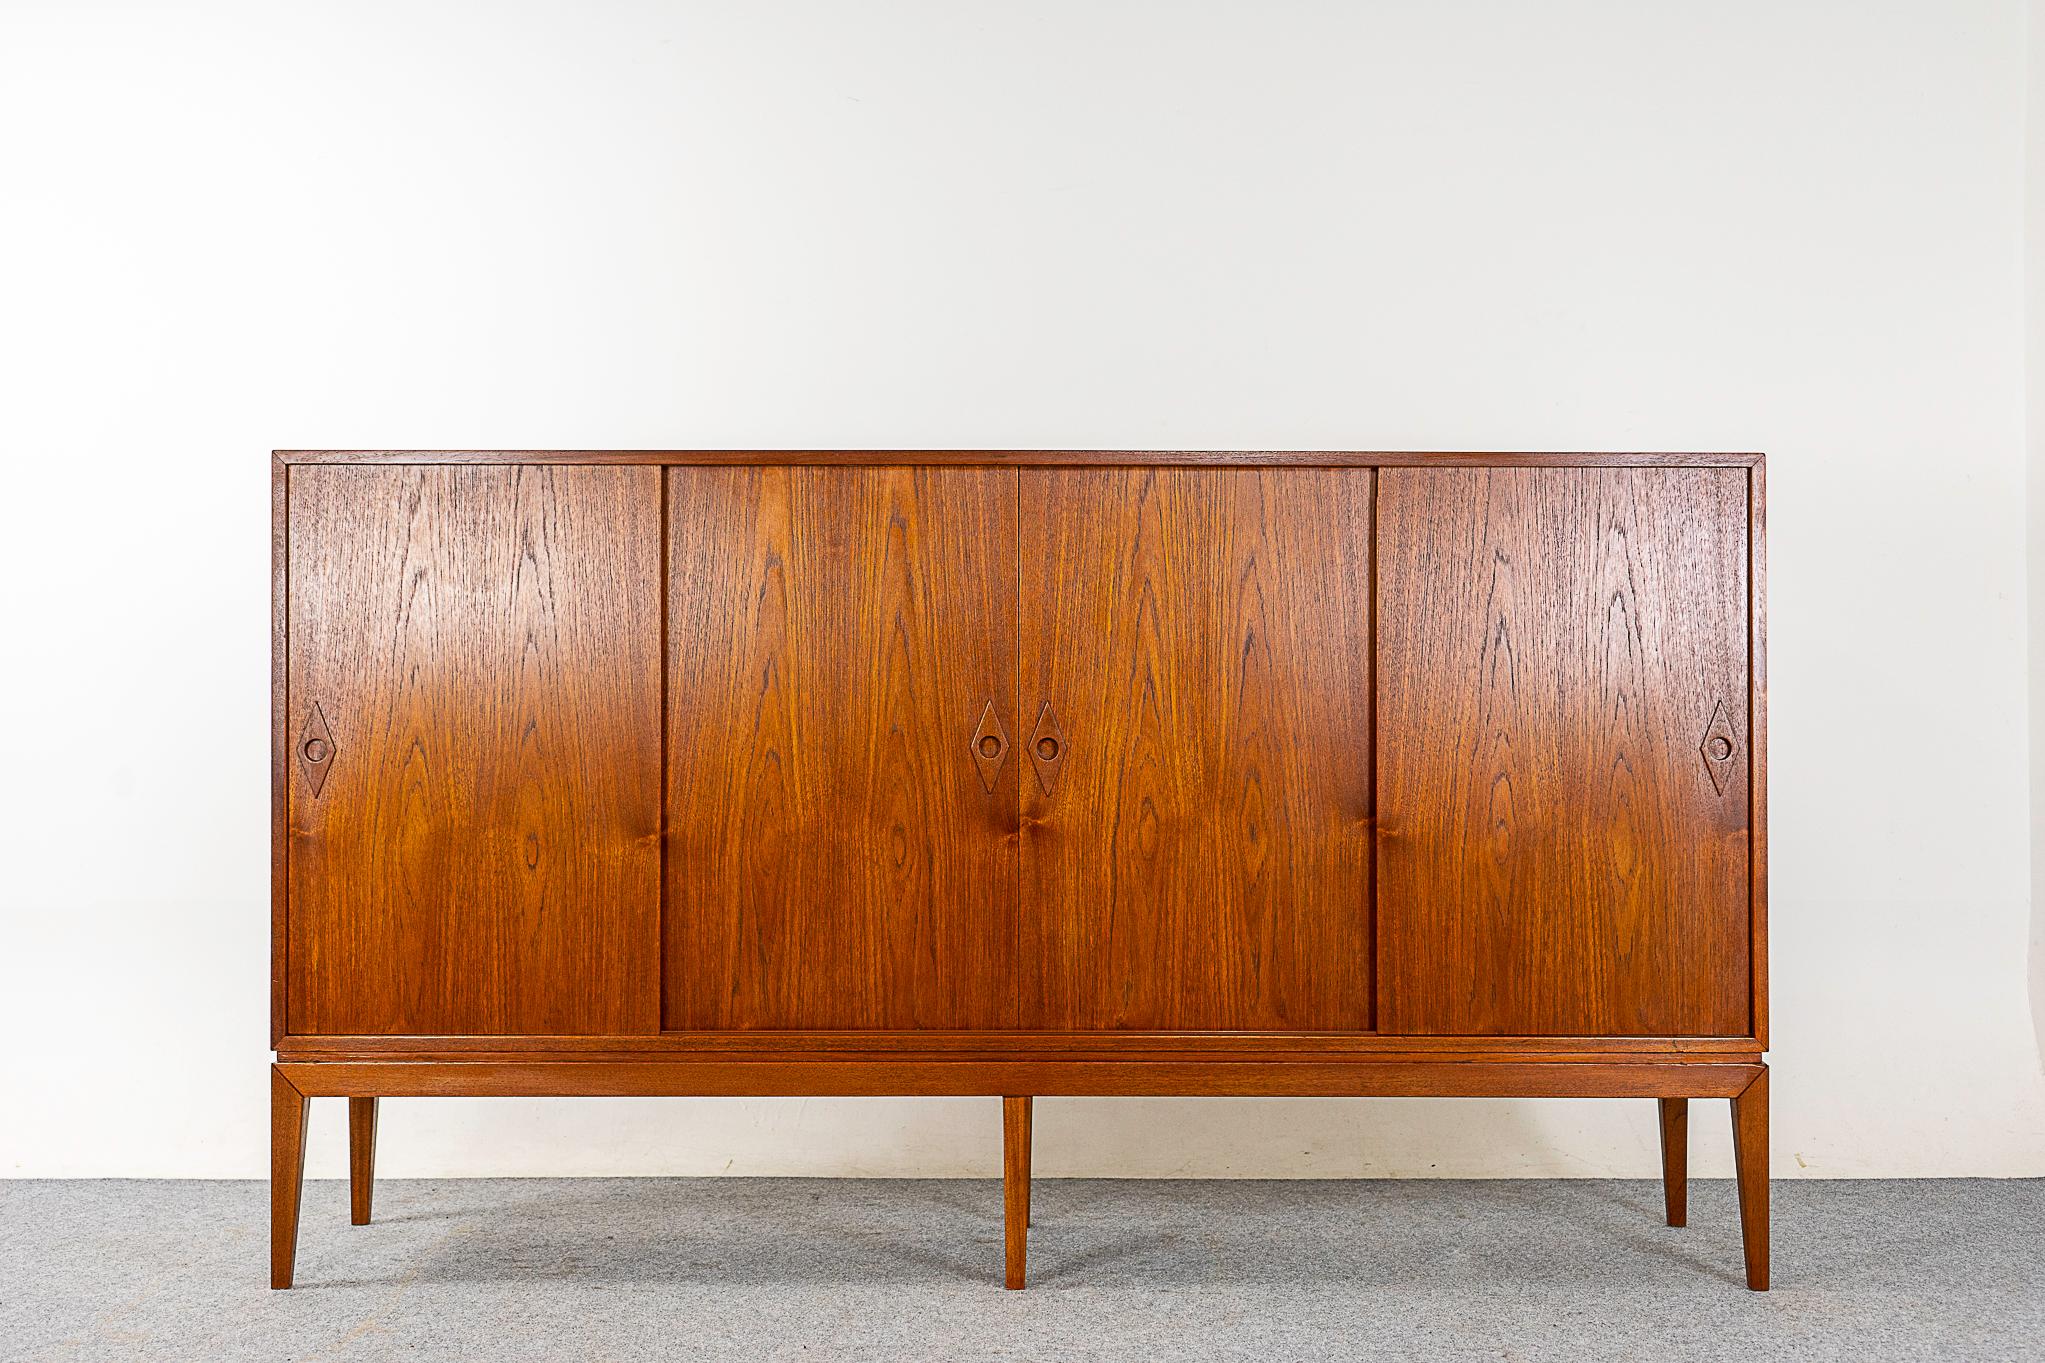 Teak Danish sideboard, circa 1960s. Generously proportioned design with warm toned book-matched veneer throughout. Darling diamond shaped finger pulls on the sliding doors. 6 adjustable shelves and 6 drawers with lovely corner joinery. Find all of